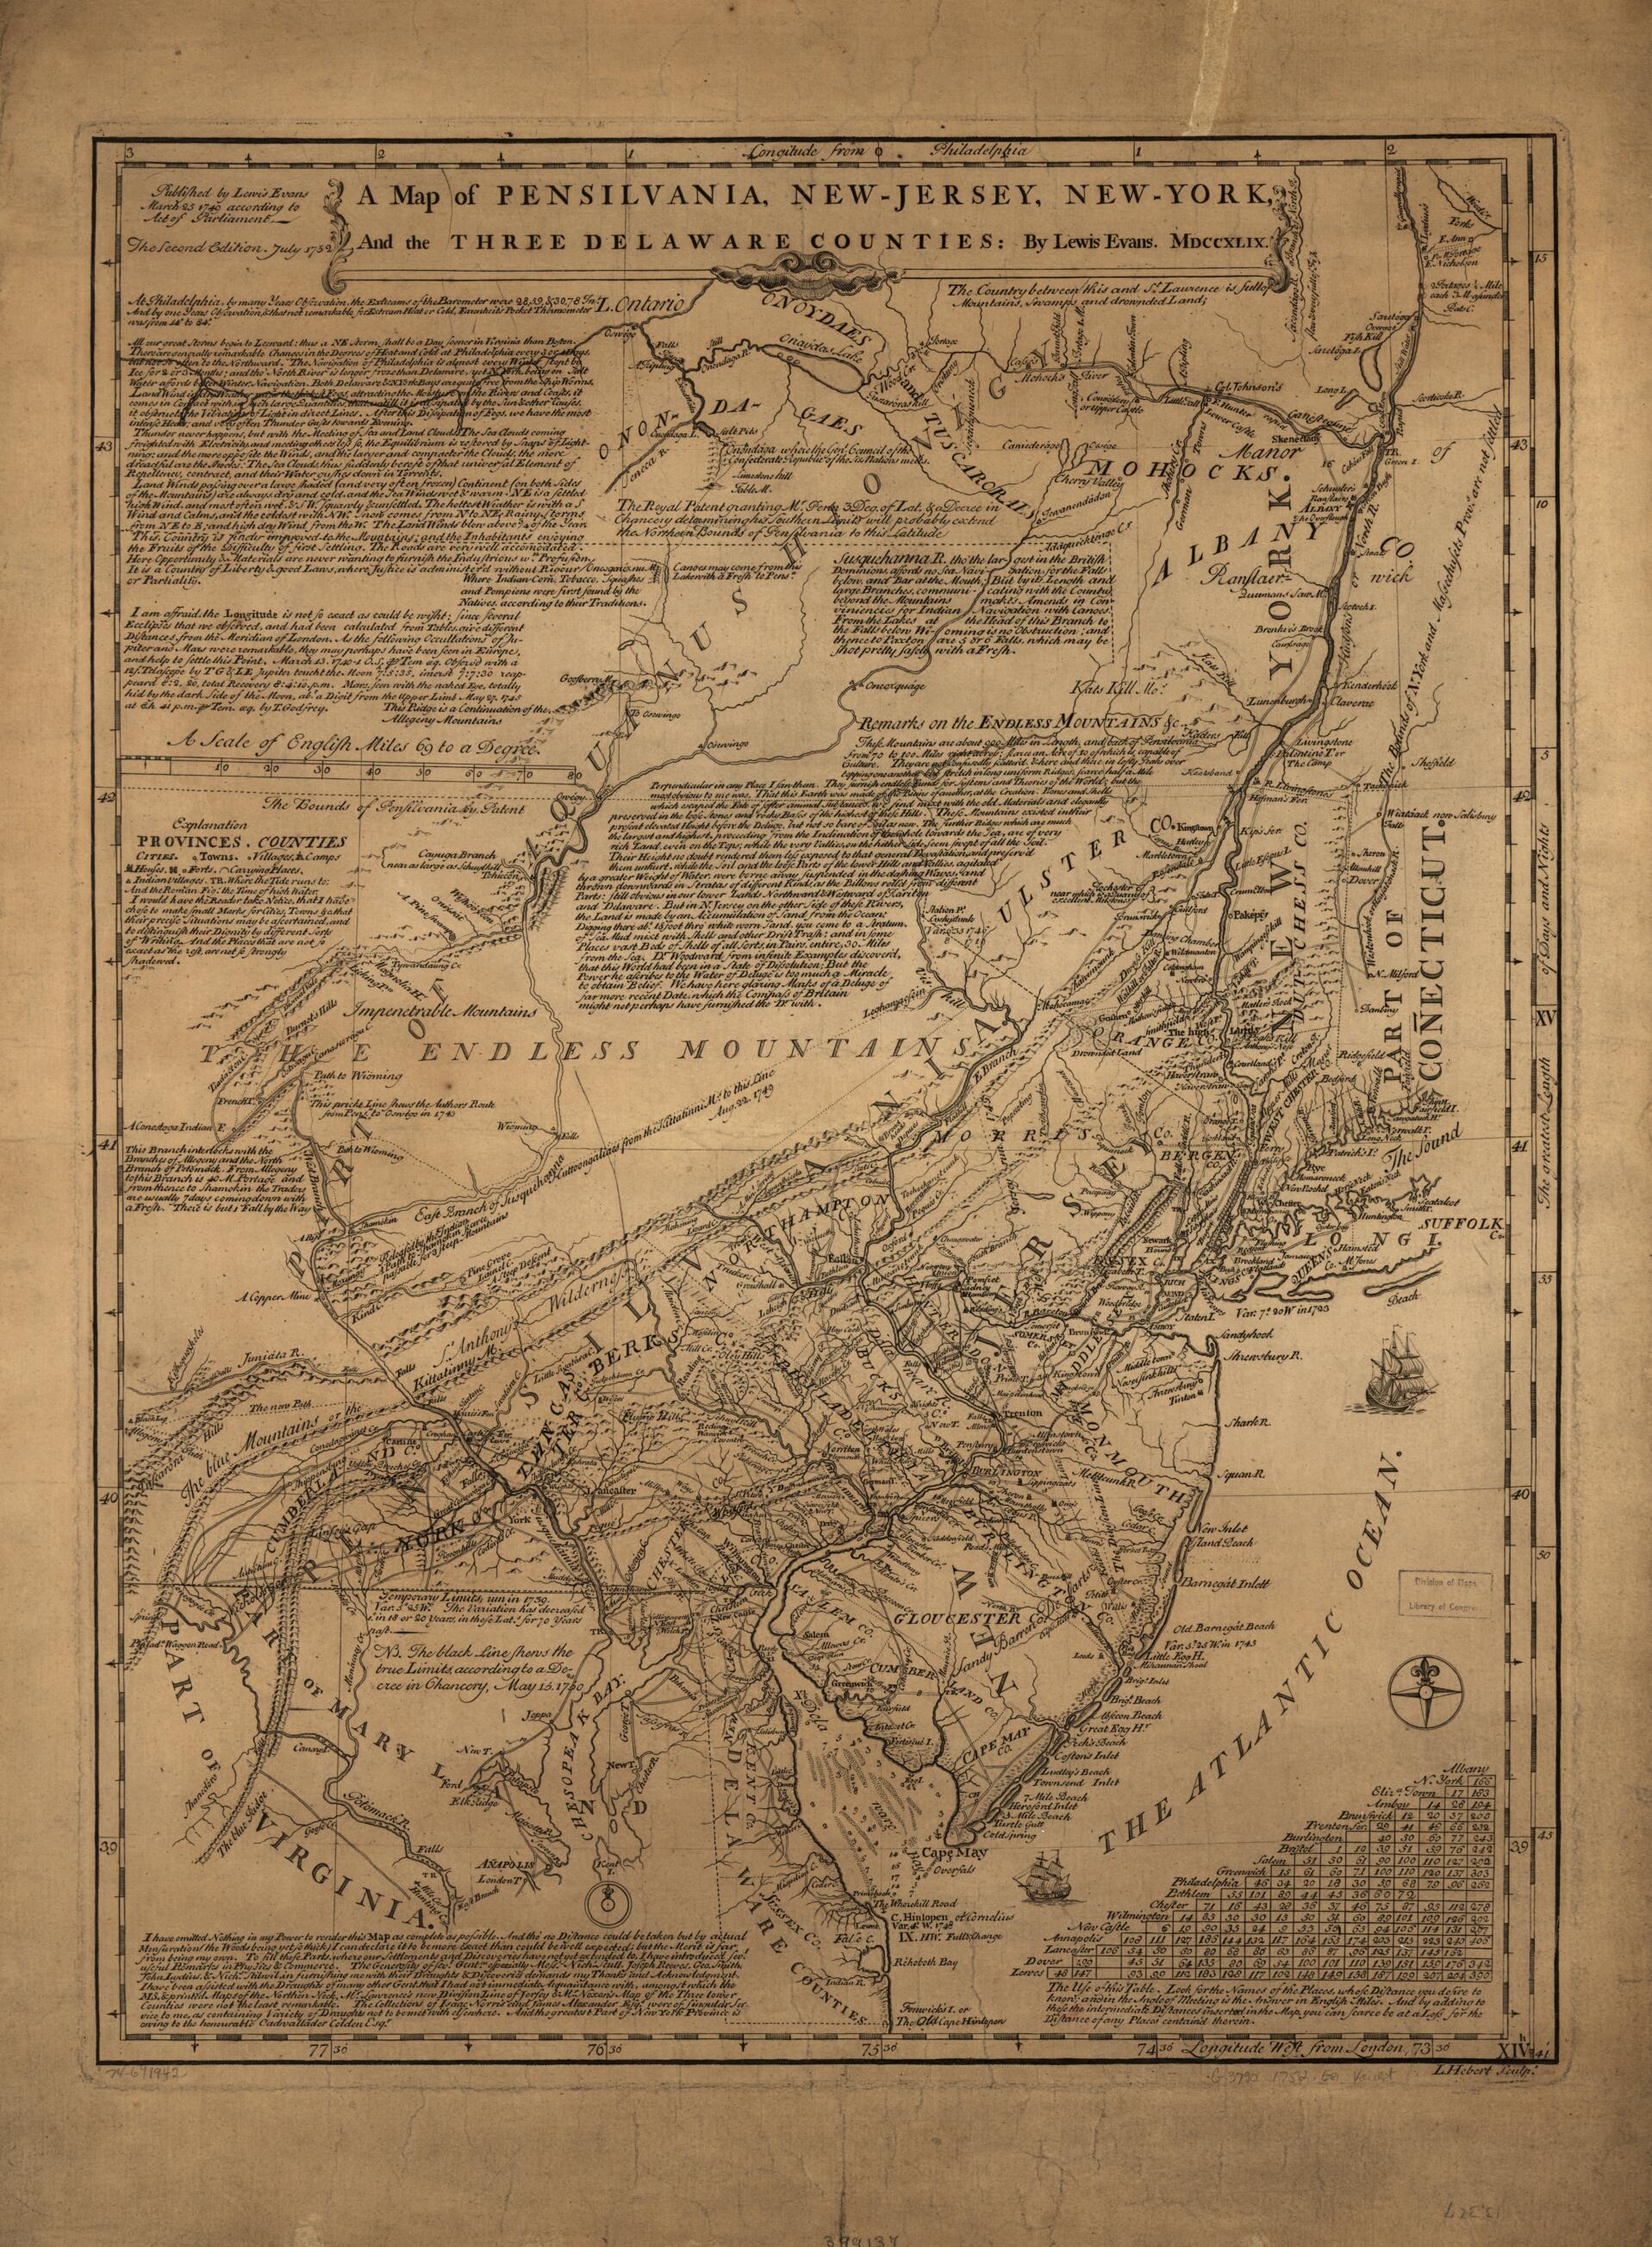 This old map of Jersey, New-York, and the Three Delaware Counties from 1752 was created by Lewis Evans, L. Hebert in 1752